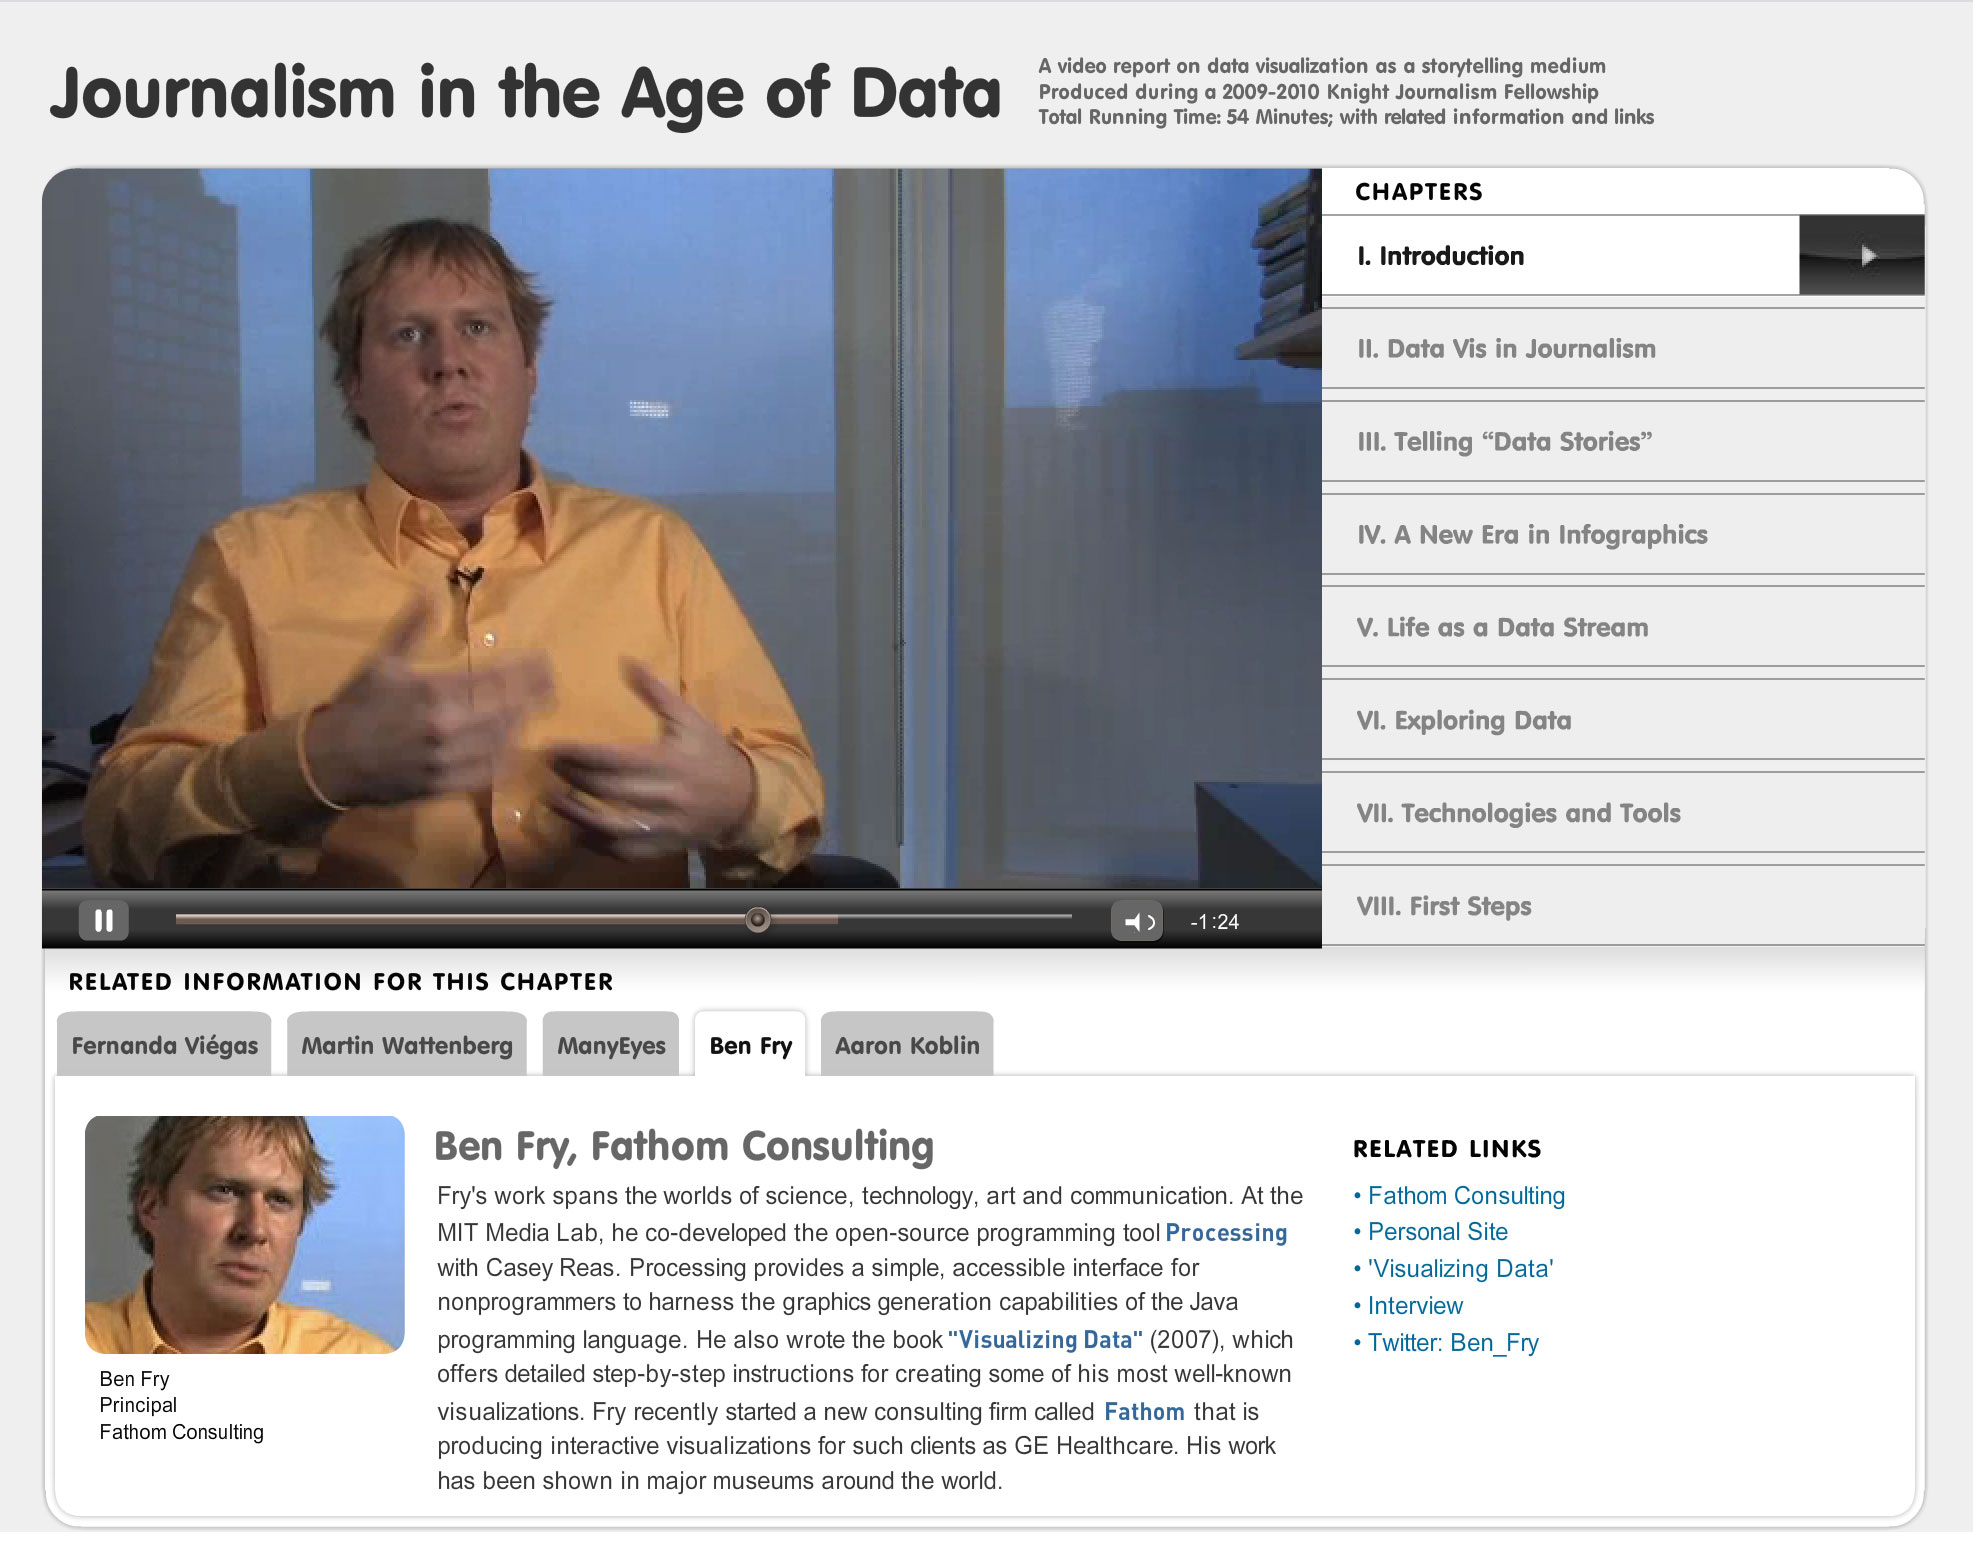 Journalism in the Age of Data web interface